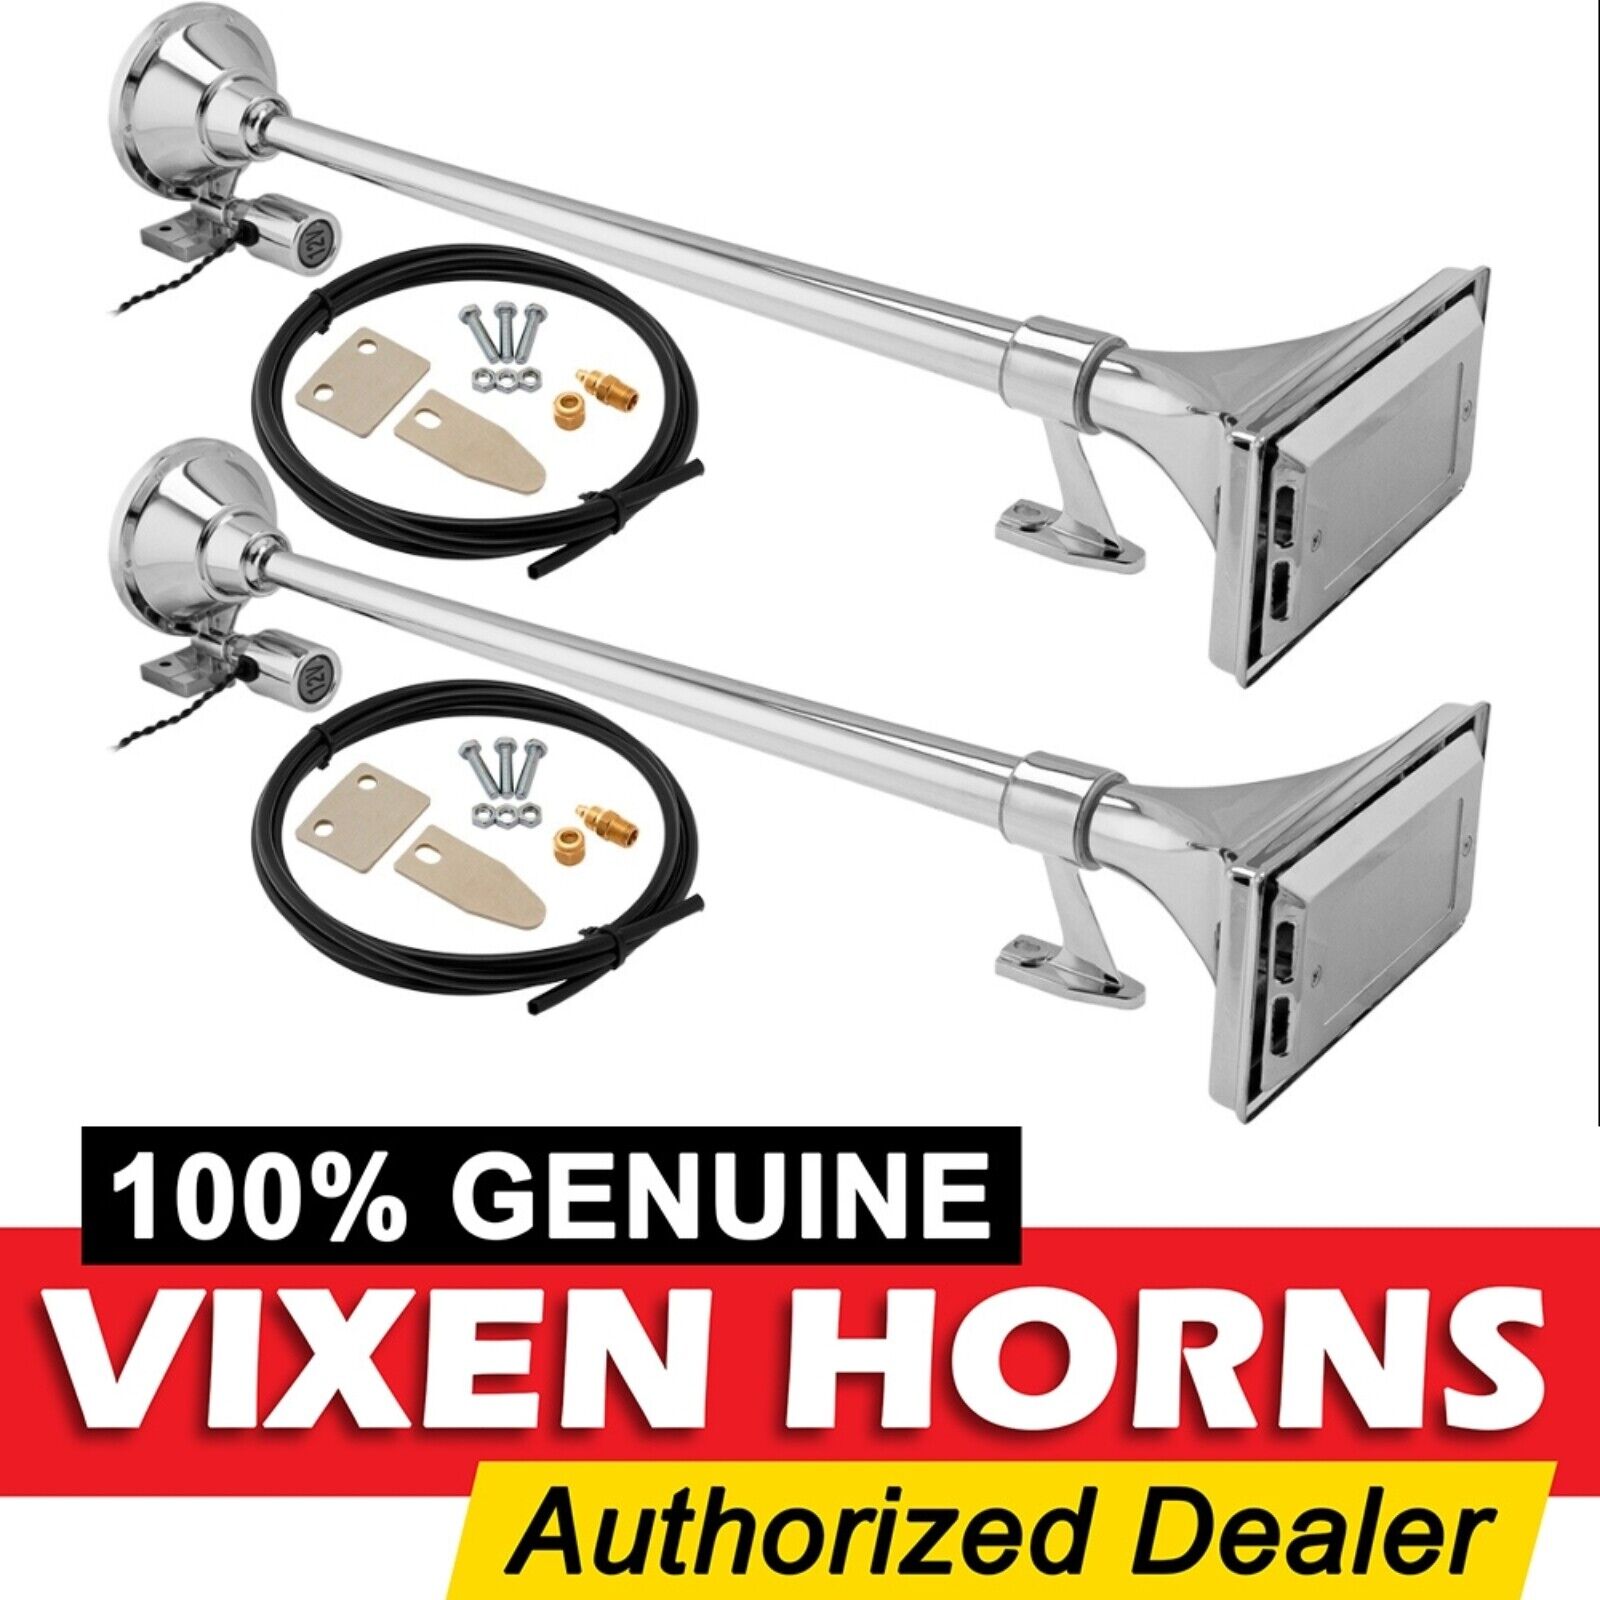 VIXEN HORNS TRAIN AIR HORN 2 TRUMPETS CHROME PLATED WATERPROOF FOR BOAT/TRUCK